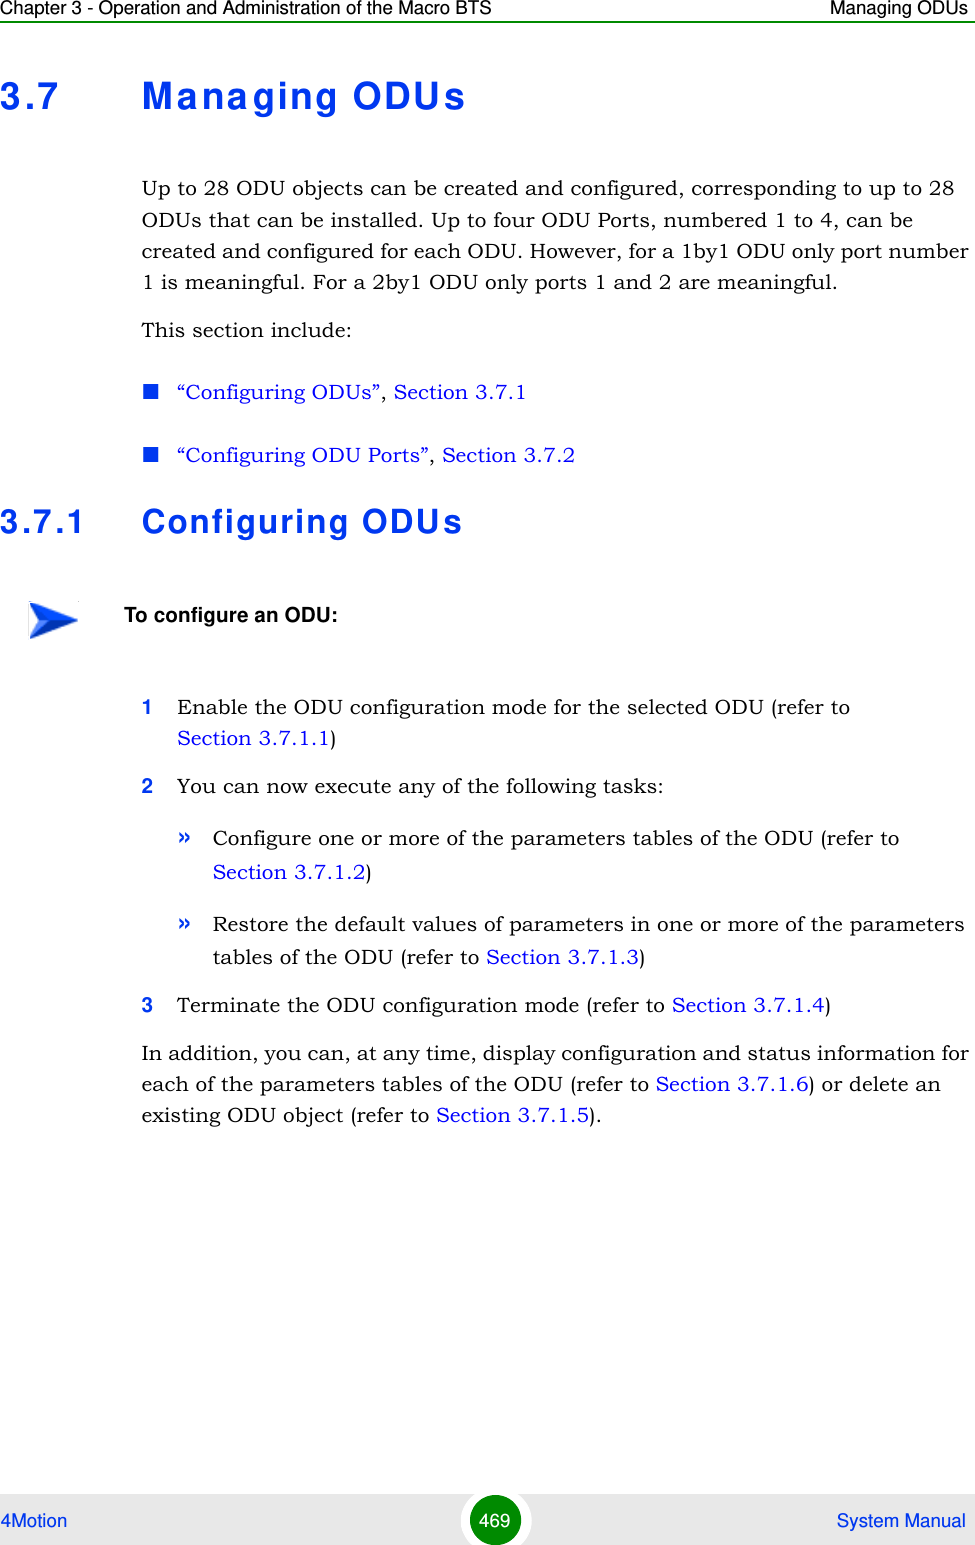 Chapter 3 - Operation and Administration of the Macro BTS Managing ODUs4Motion 469  System Manual3.7 Ma na ging ODUsUp to 28 ODU objects can be created and configured, corresponding to up to 28 ODUs that can be installed. Up to four ODU Ports, numbered 1 to 4, can be created and configured for each ODU. However, for a 1by1 ODU only port number 1 is meaningful. For a 2by1 ODU only ports 1 and 2 are meaningful.This section include:“Configuring ODUs”, Section 3.7.1“Configuring ODU Ports”, Section 3.7.23.7 .1 Configuring ODUs1Enable the ODU configuration mode for the selected ODU (refer to Section 3.7.1.1)2You can now execute any of the following tasks:»Configure one or more of the parameters tables of the ODU (refer to Section 3.7.1.2)»Restore the default values of parameters in one or more of the parameters tables of the ODU (refer to Section 3.7.1.3)3Terminate the ODU configuration mode (refer to Section 3.7.1.4)In addition, you can, at any time, display configuration and status information for each of the parameters tables of the ODU (refer to Section 3.7.1.6) or delete an existing ODU object (refer to Section 3.7.1.5).To configure an ODU: